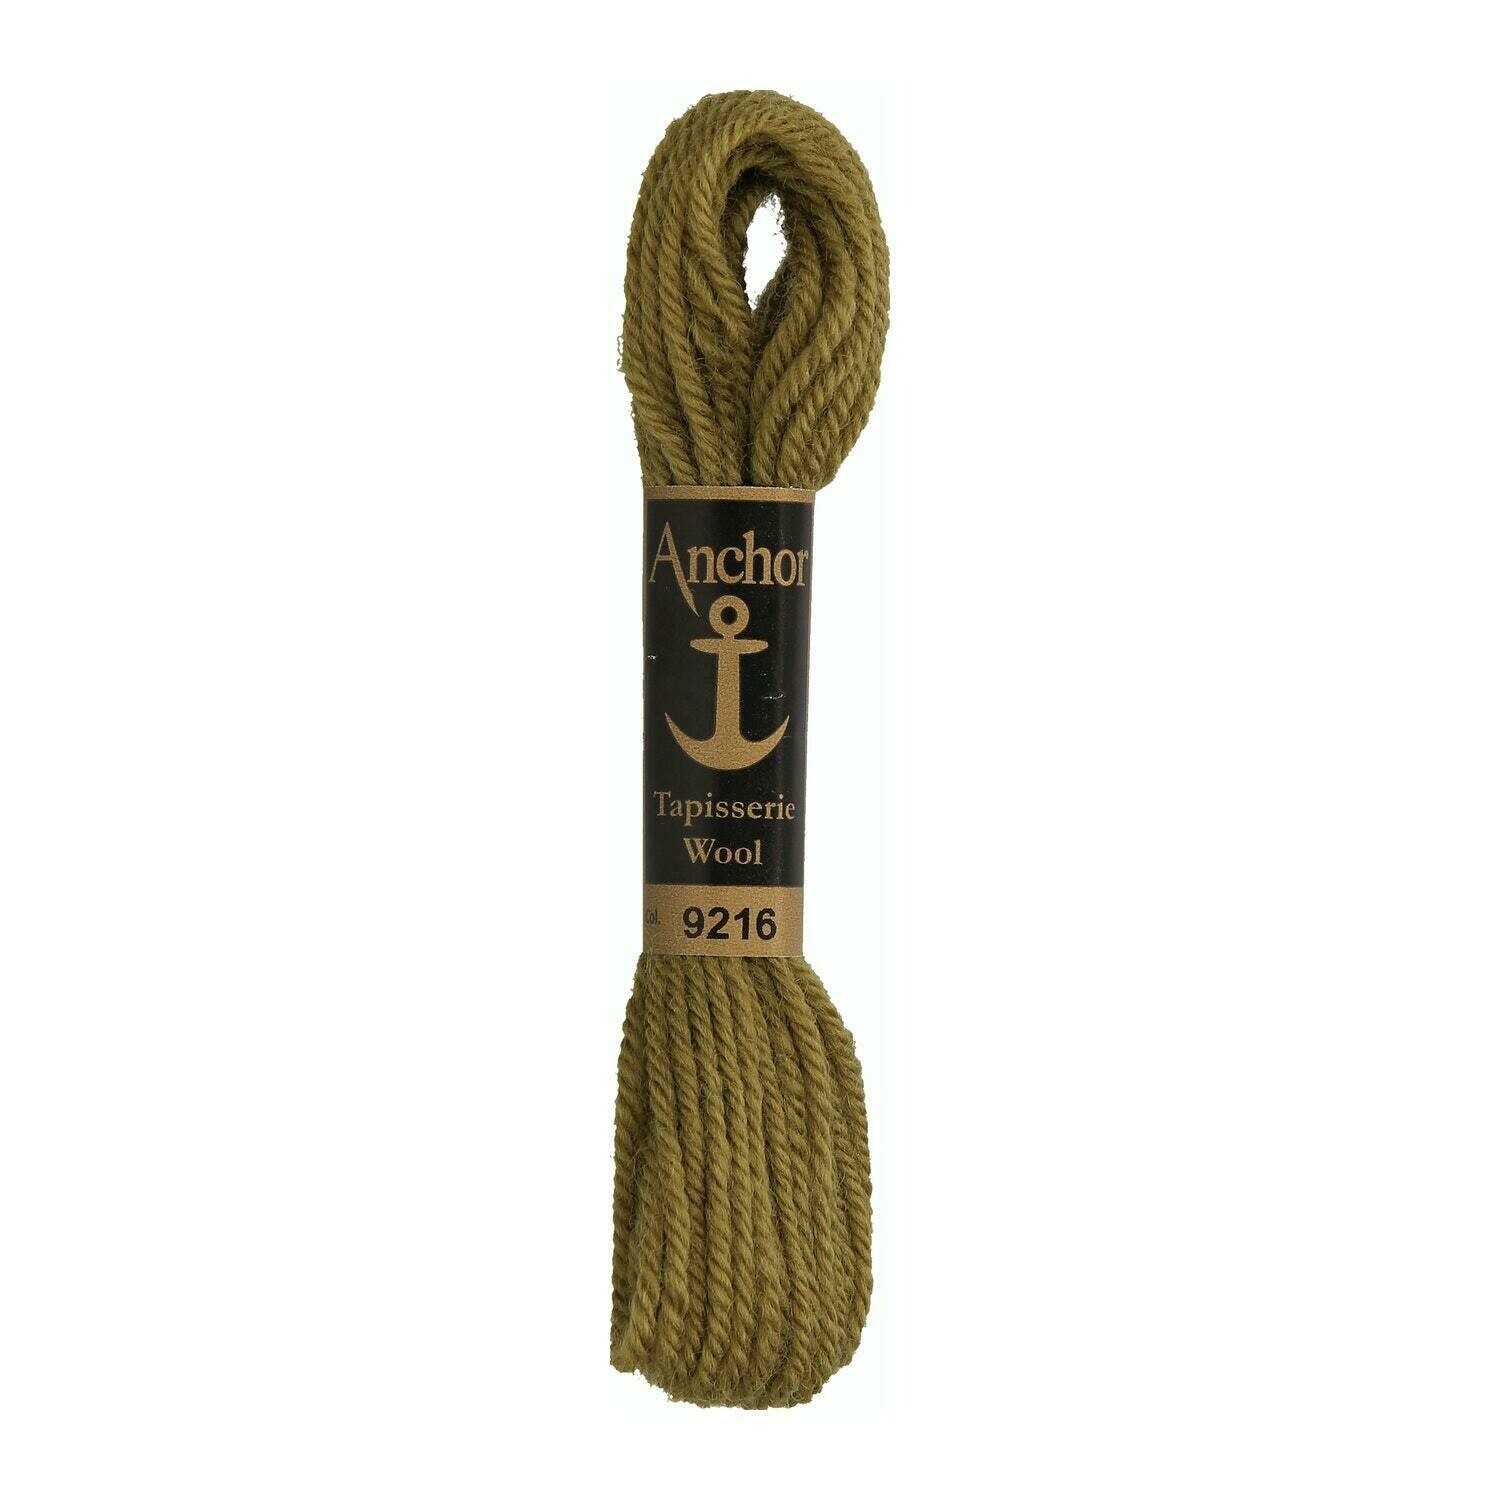 Anchor Tapisserie Wool #09216